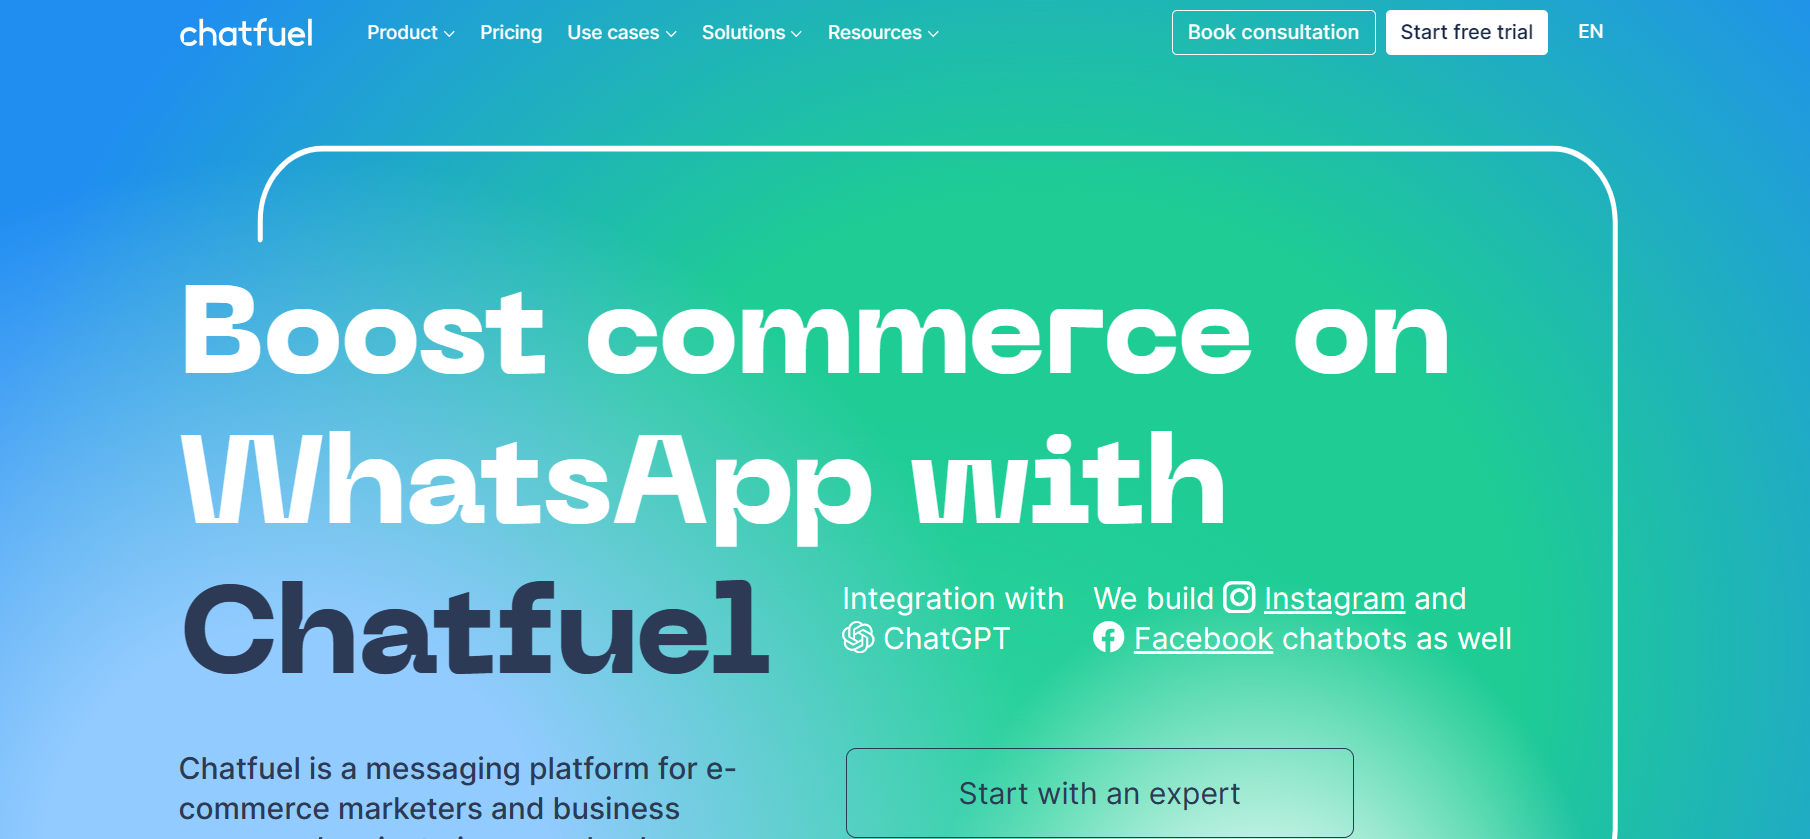 Chatfuel is AI powered tool for e-commerce and business